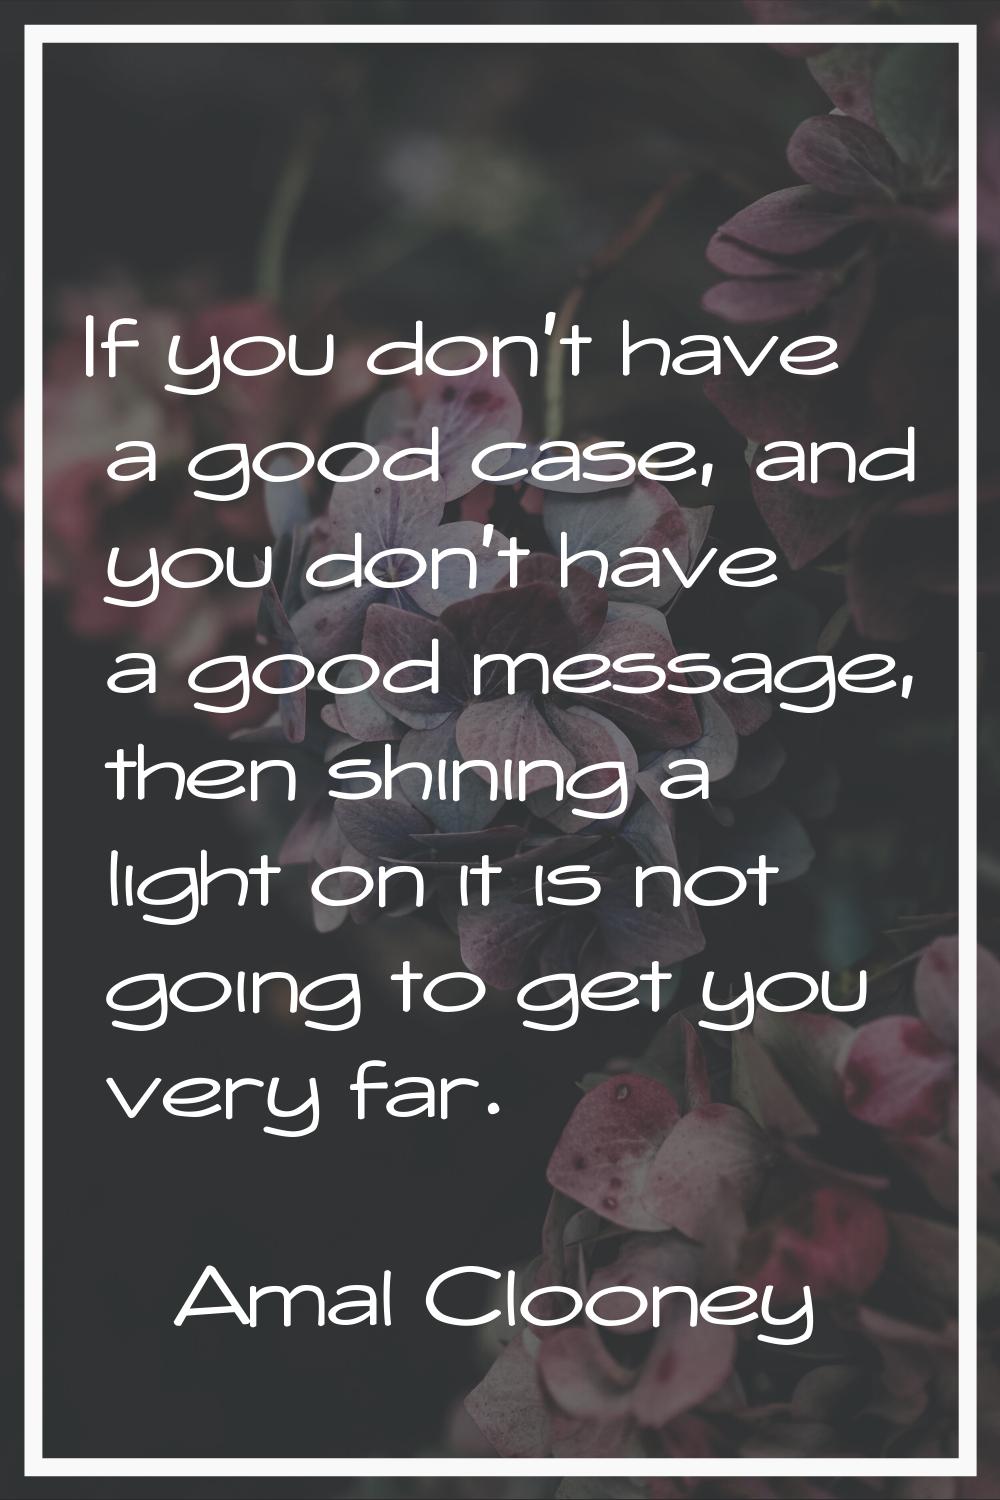 If you don't have a good case, and you don't have a good message, then shining a light on it is not